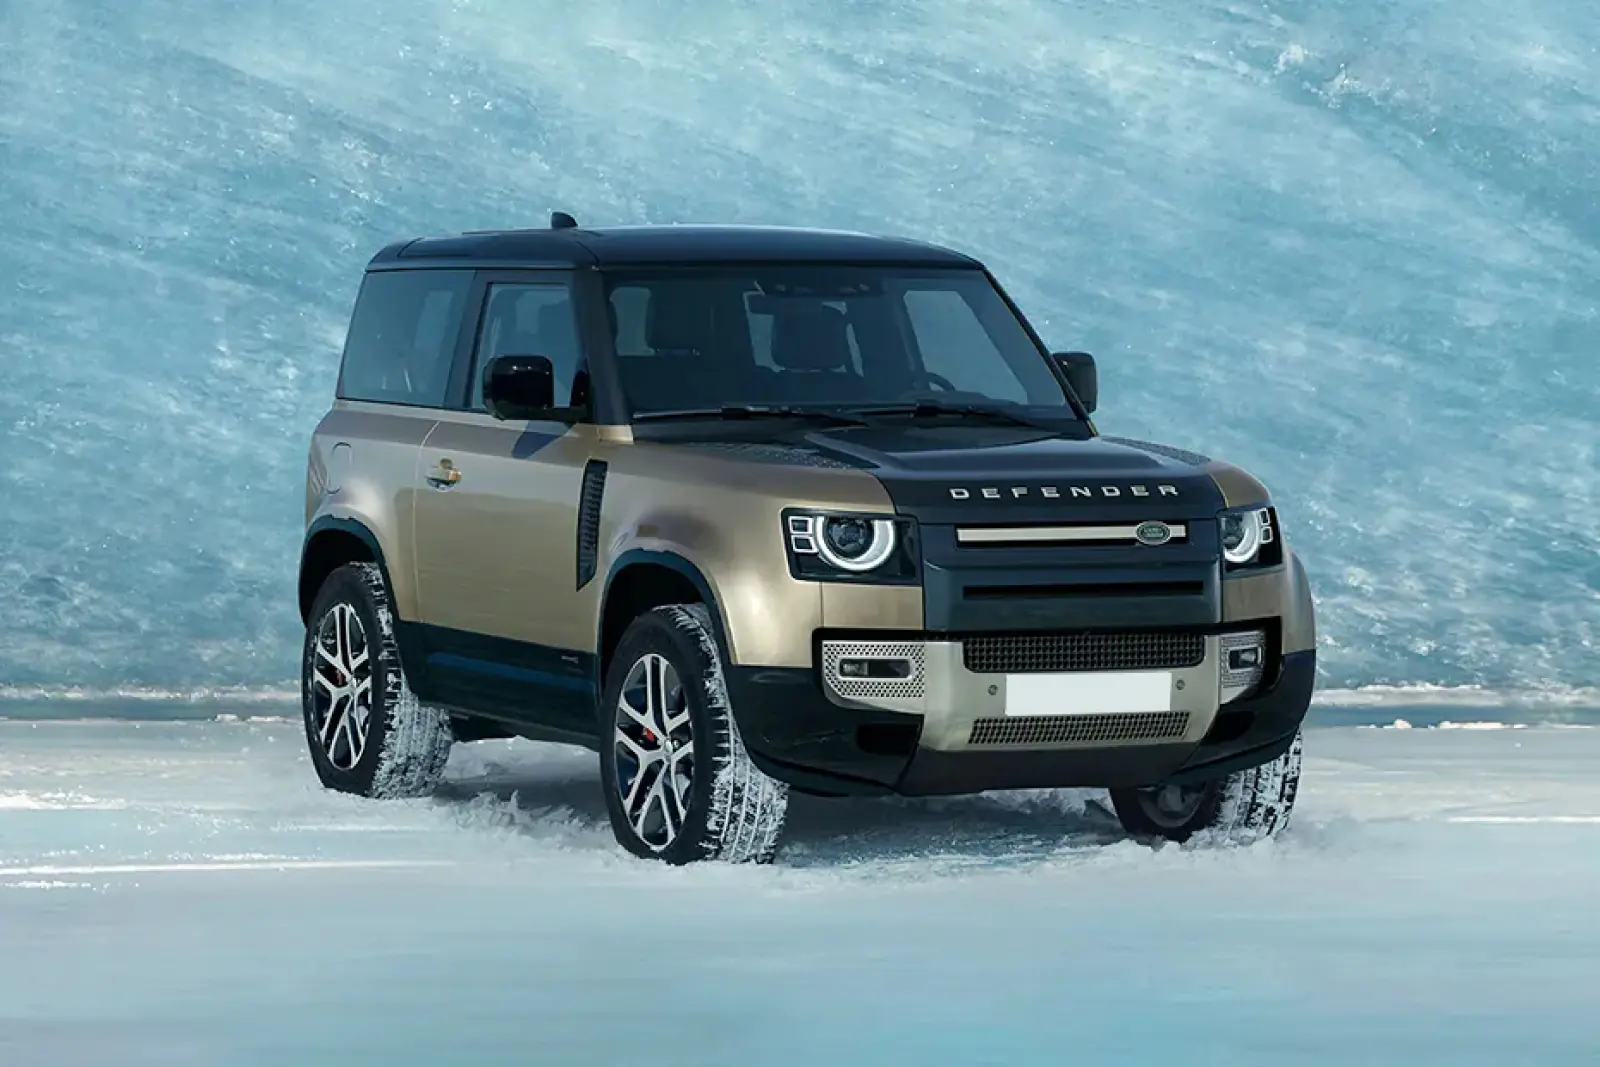 Land Rover's most powerful SUV Defender Octa has arrived in India, know how much is the price and what are the features